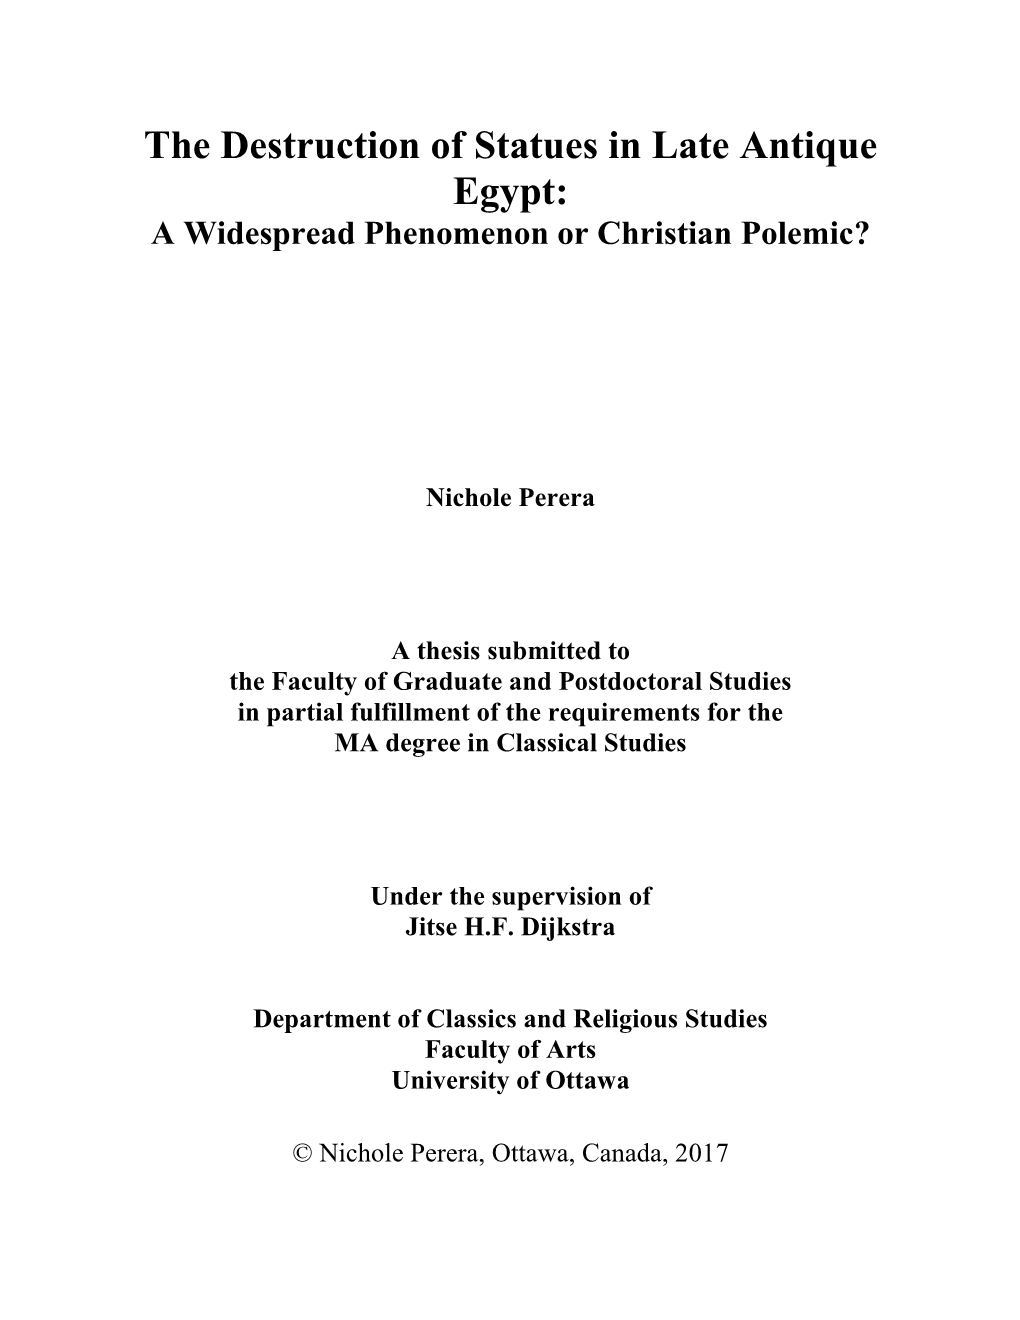 The Destruction of Statues in Late Antique Egypt: a Widespread Phenomenon Or Christian Polemic?